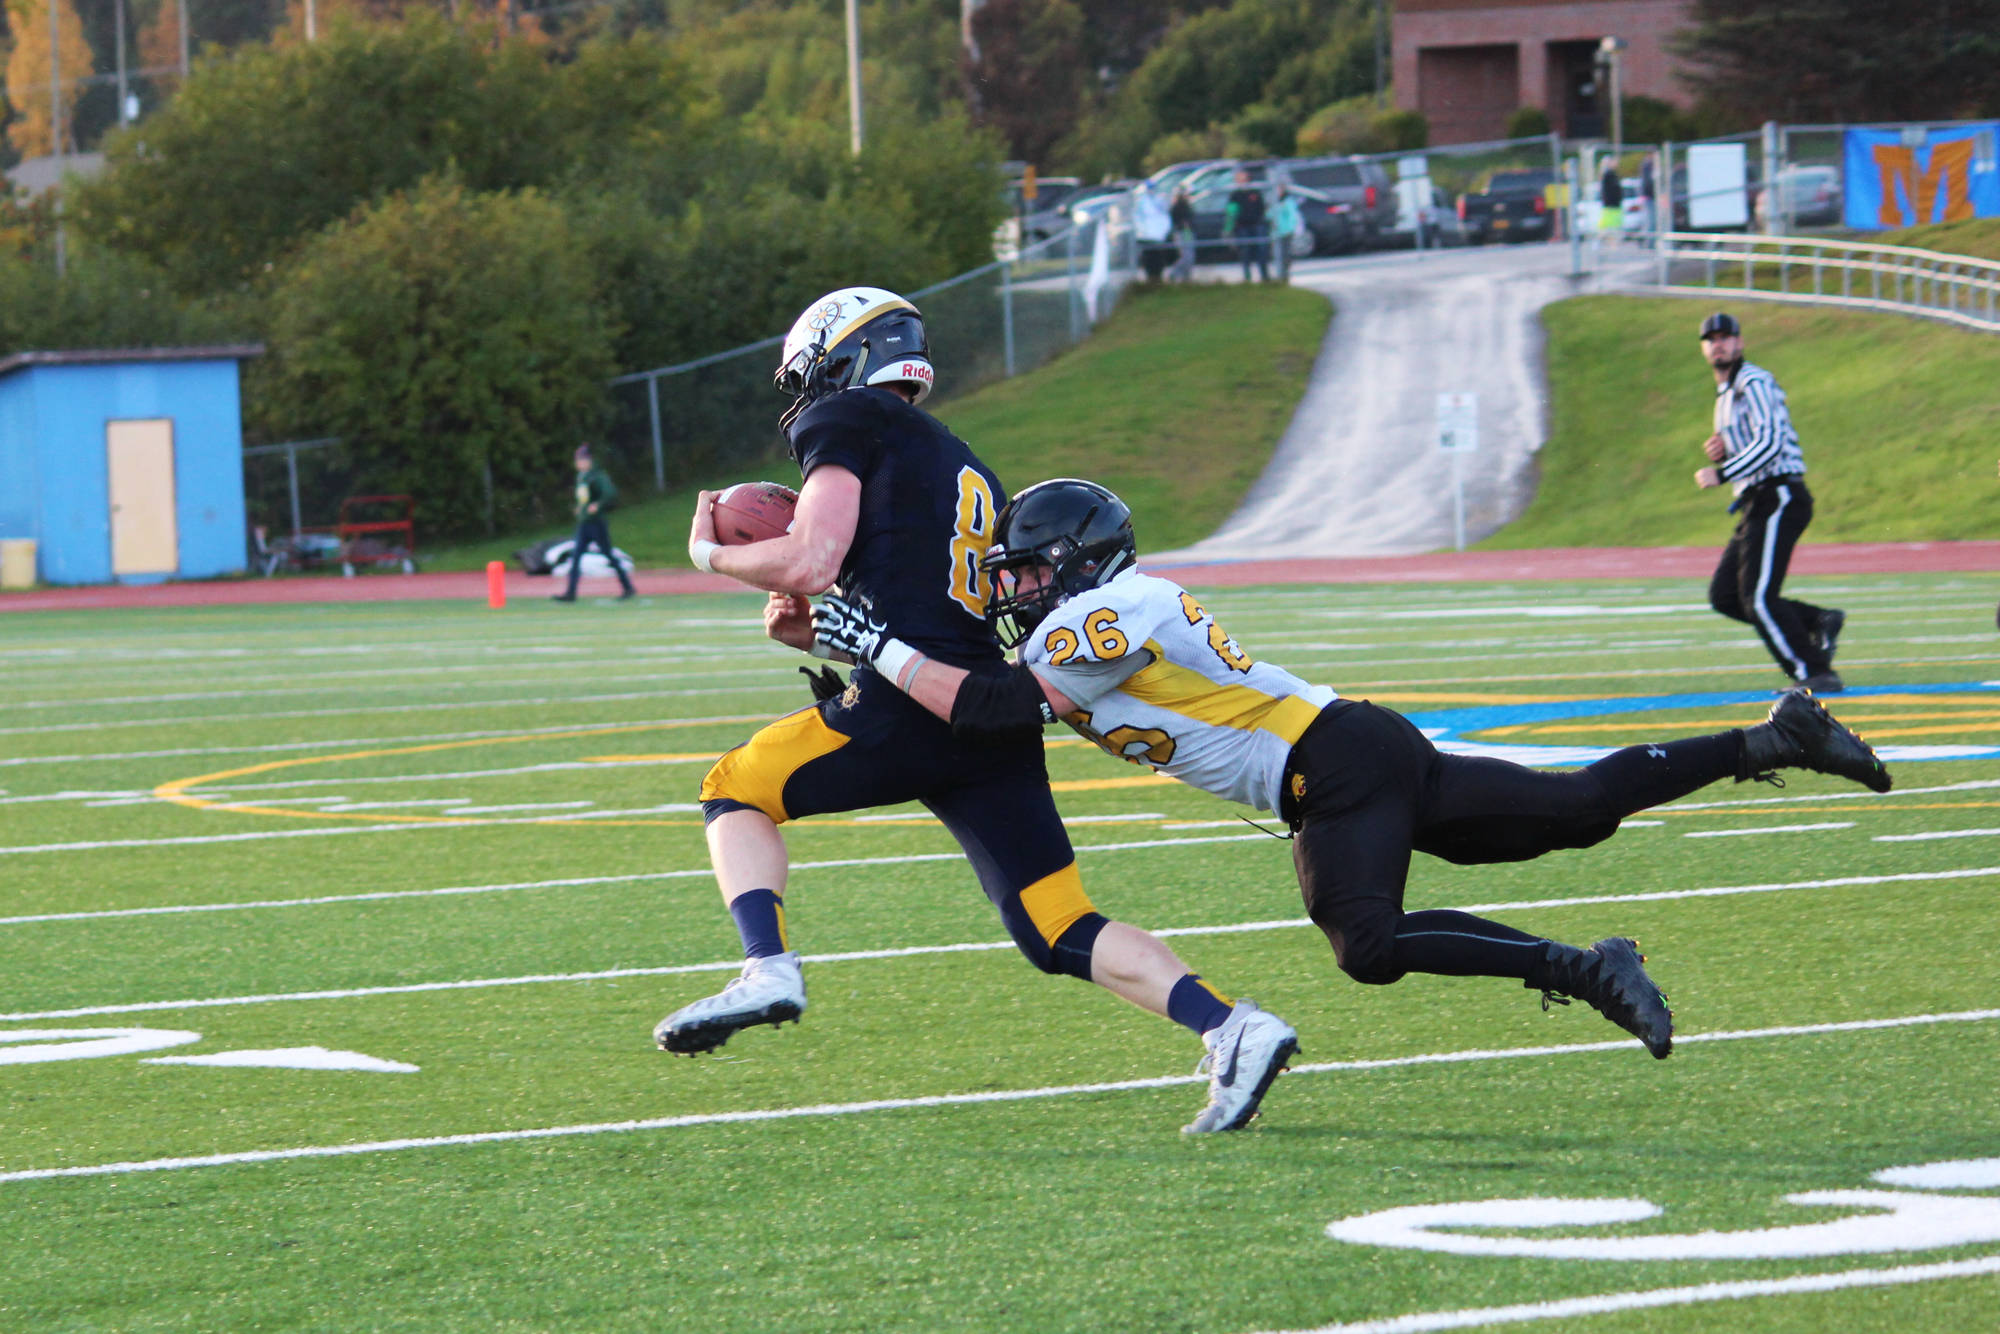 Senior Cougars player David Sanarov tackles Homer Mariners quarterback Teddy Croft during their game Friday, Sept. 29, 2017 at the Mariner field in Homer, Alaska. Homer topped the Cougars 53-0 in the last game for the Head of the Bay team made up of Voznesenka, Razdolna and Kachemak-Selo. (Photo by Megan Pacer/Homer News)